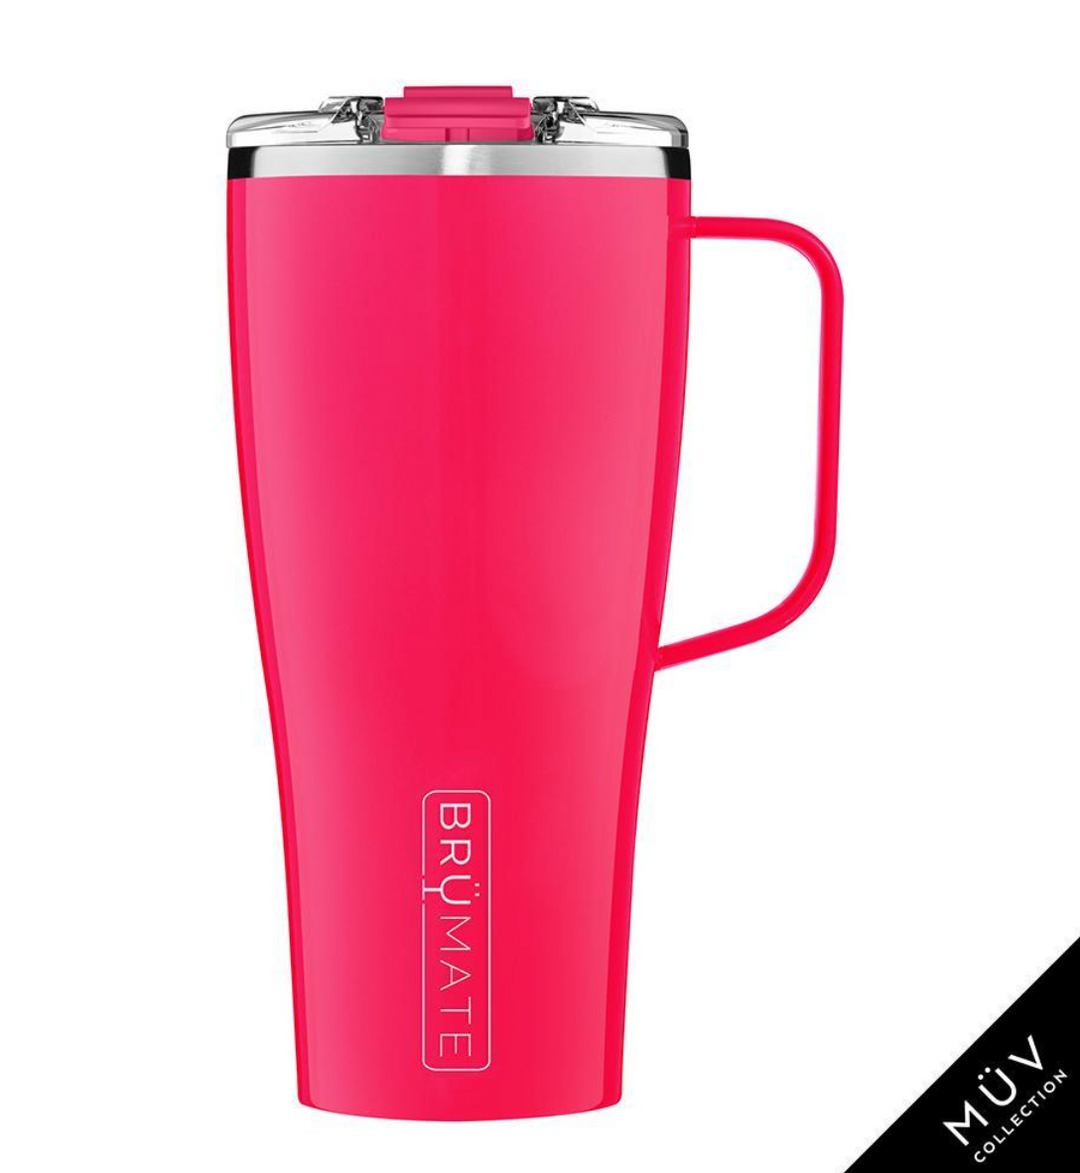 BruMate Toddy XL mug glitter rose gold  Trendy Gifts with max length -  Lush Fashion Lounge